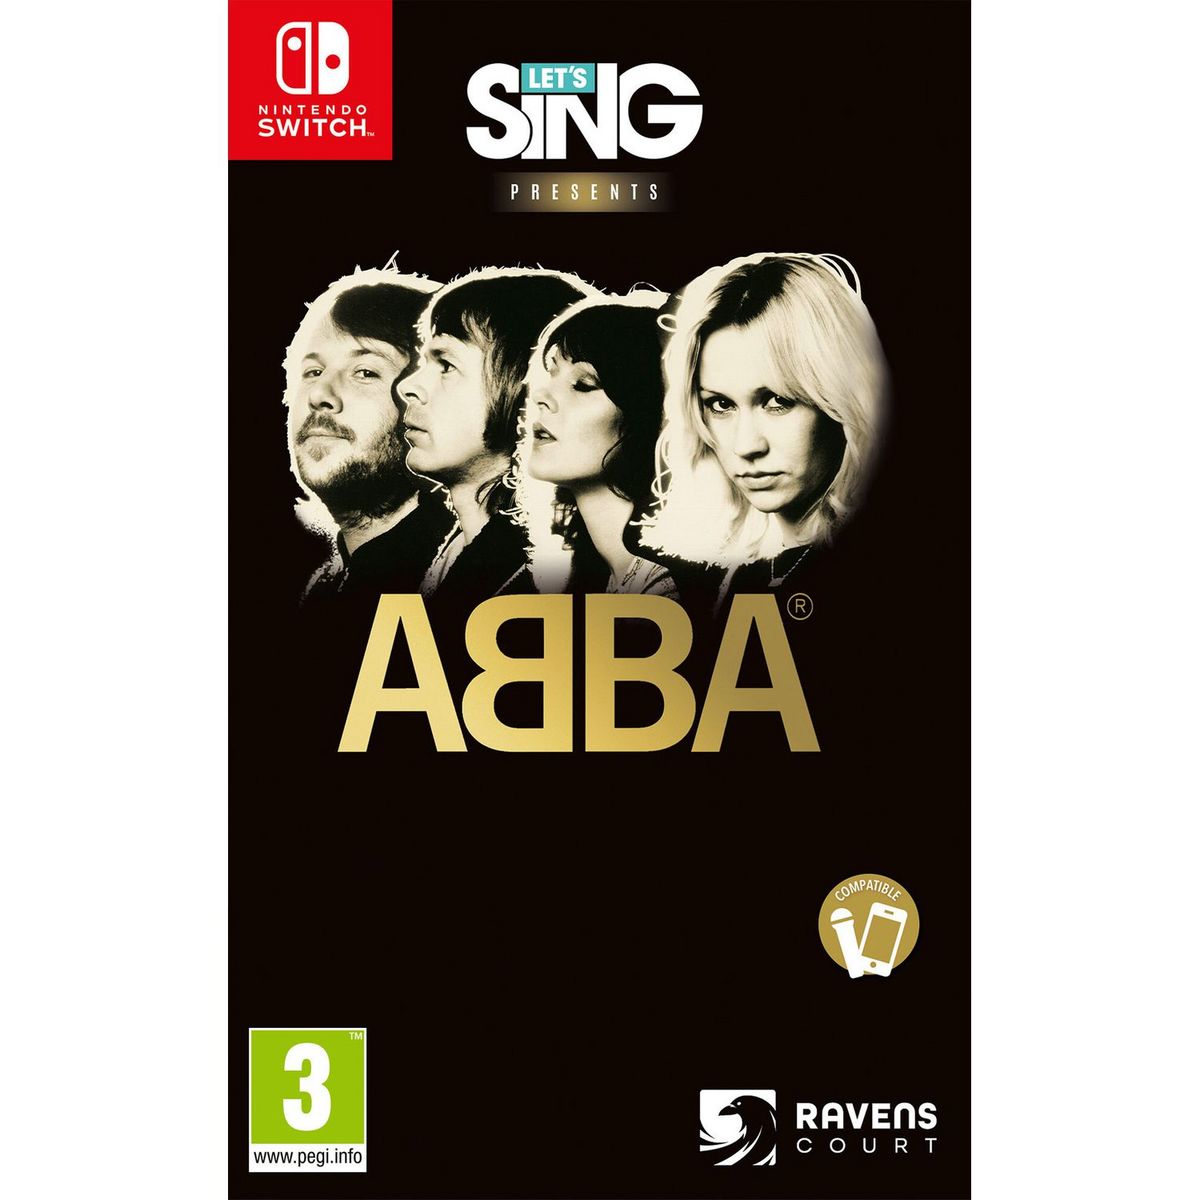 Let's Sing ABBA Nintendo Switch